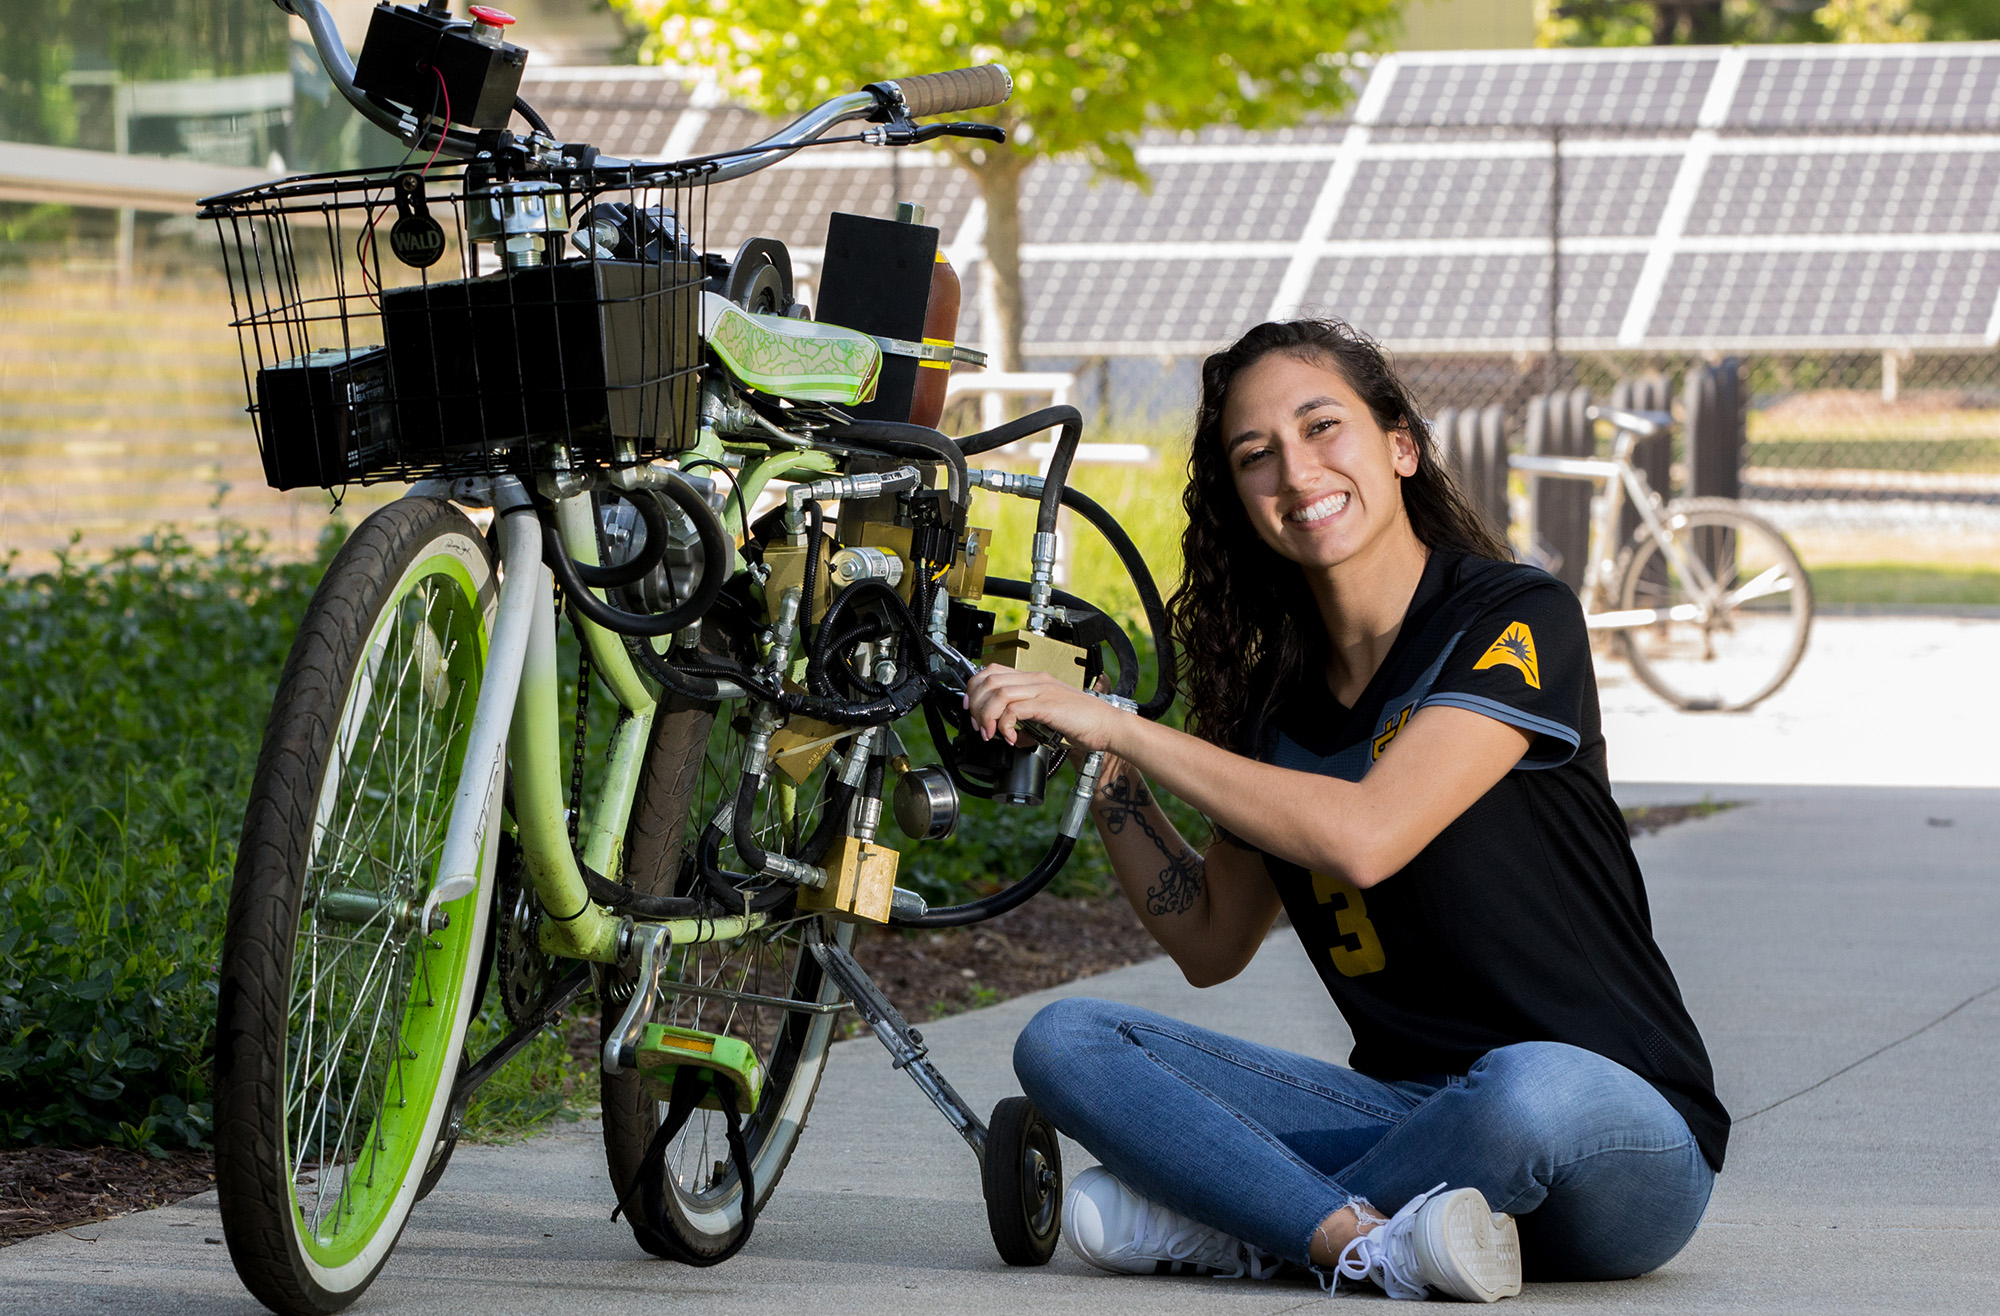 mechanical engineering graduate who recently took part in a national competition involving a hydraulic powered bike